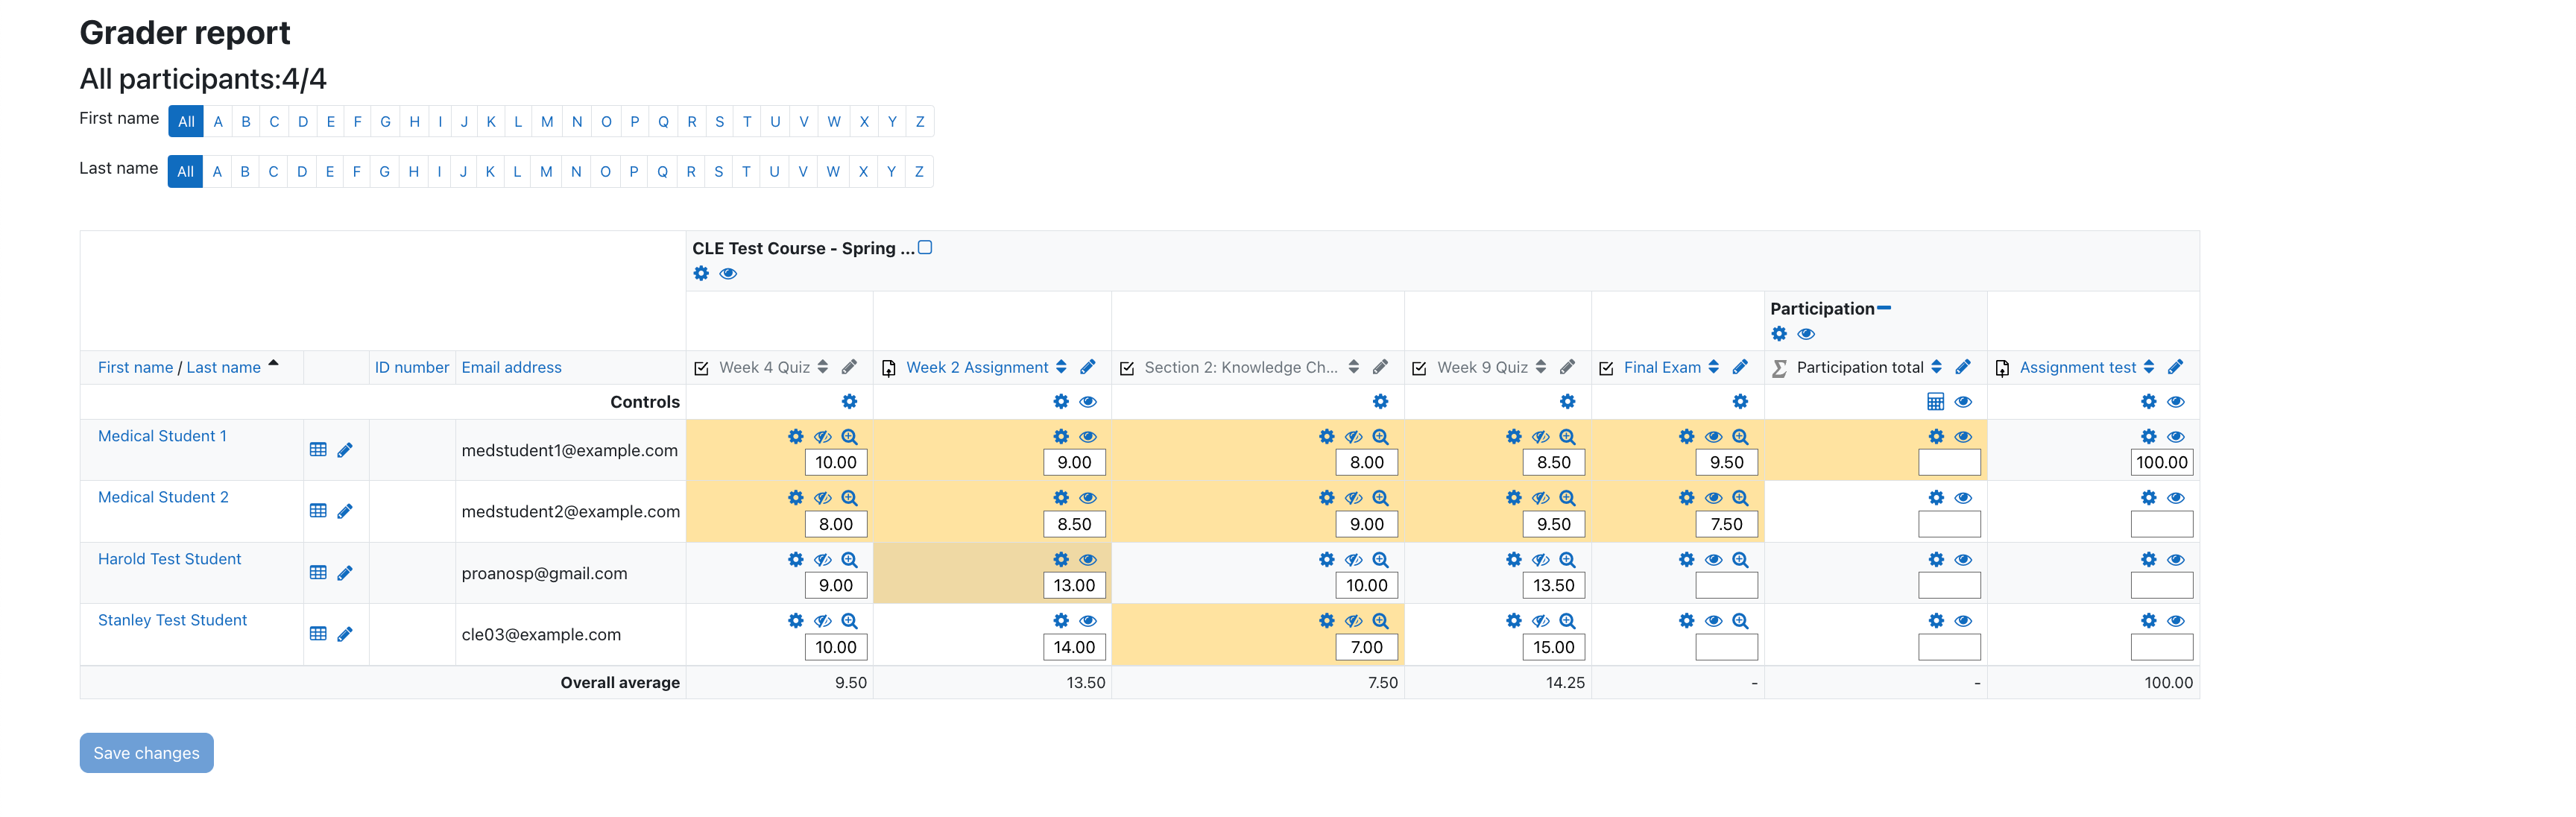 A screenshot of the UCSF CLE gradebook grader report showing the drop-down menu for different gadebook views.png